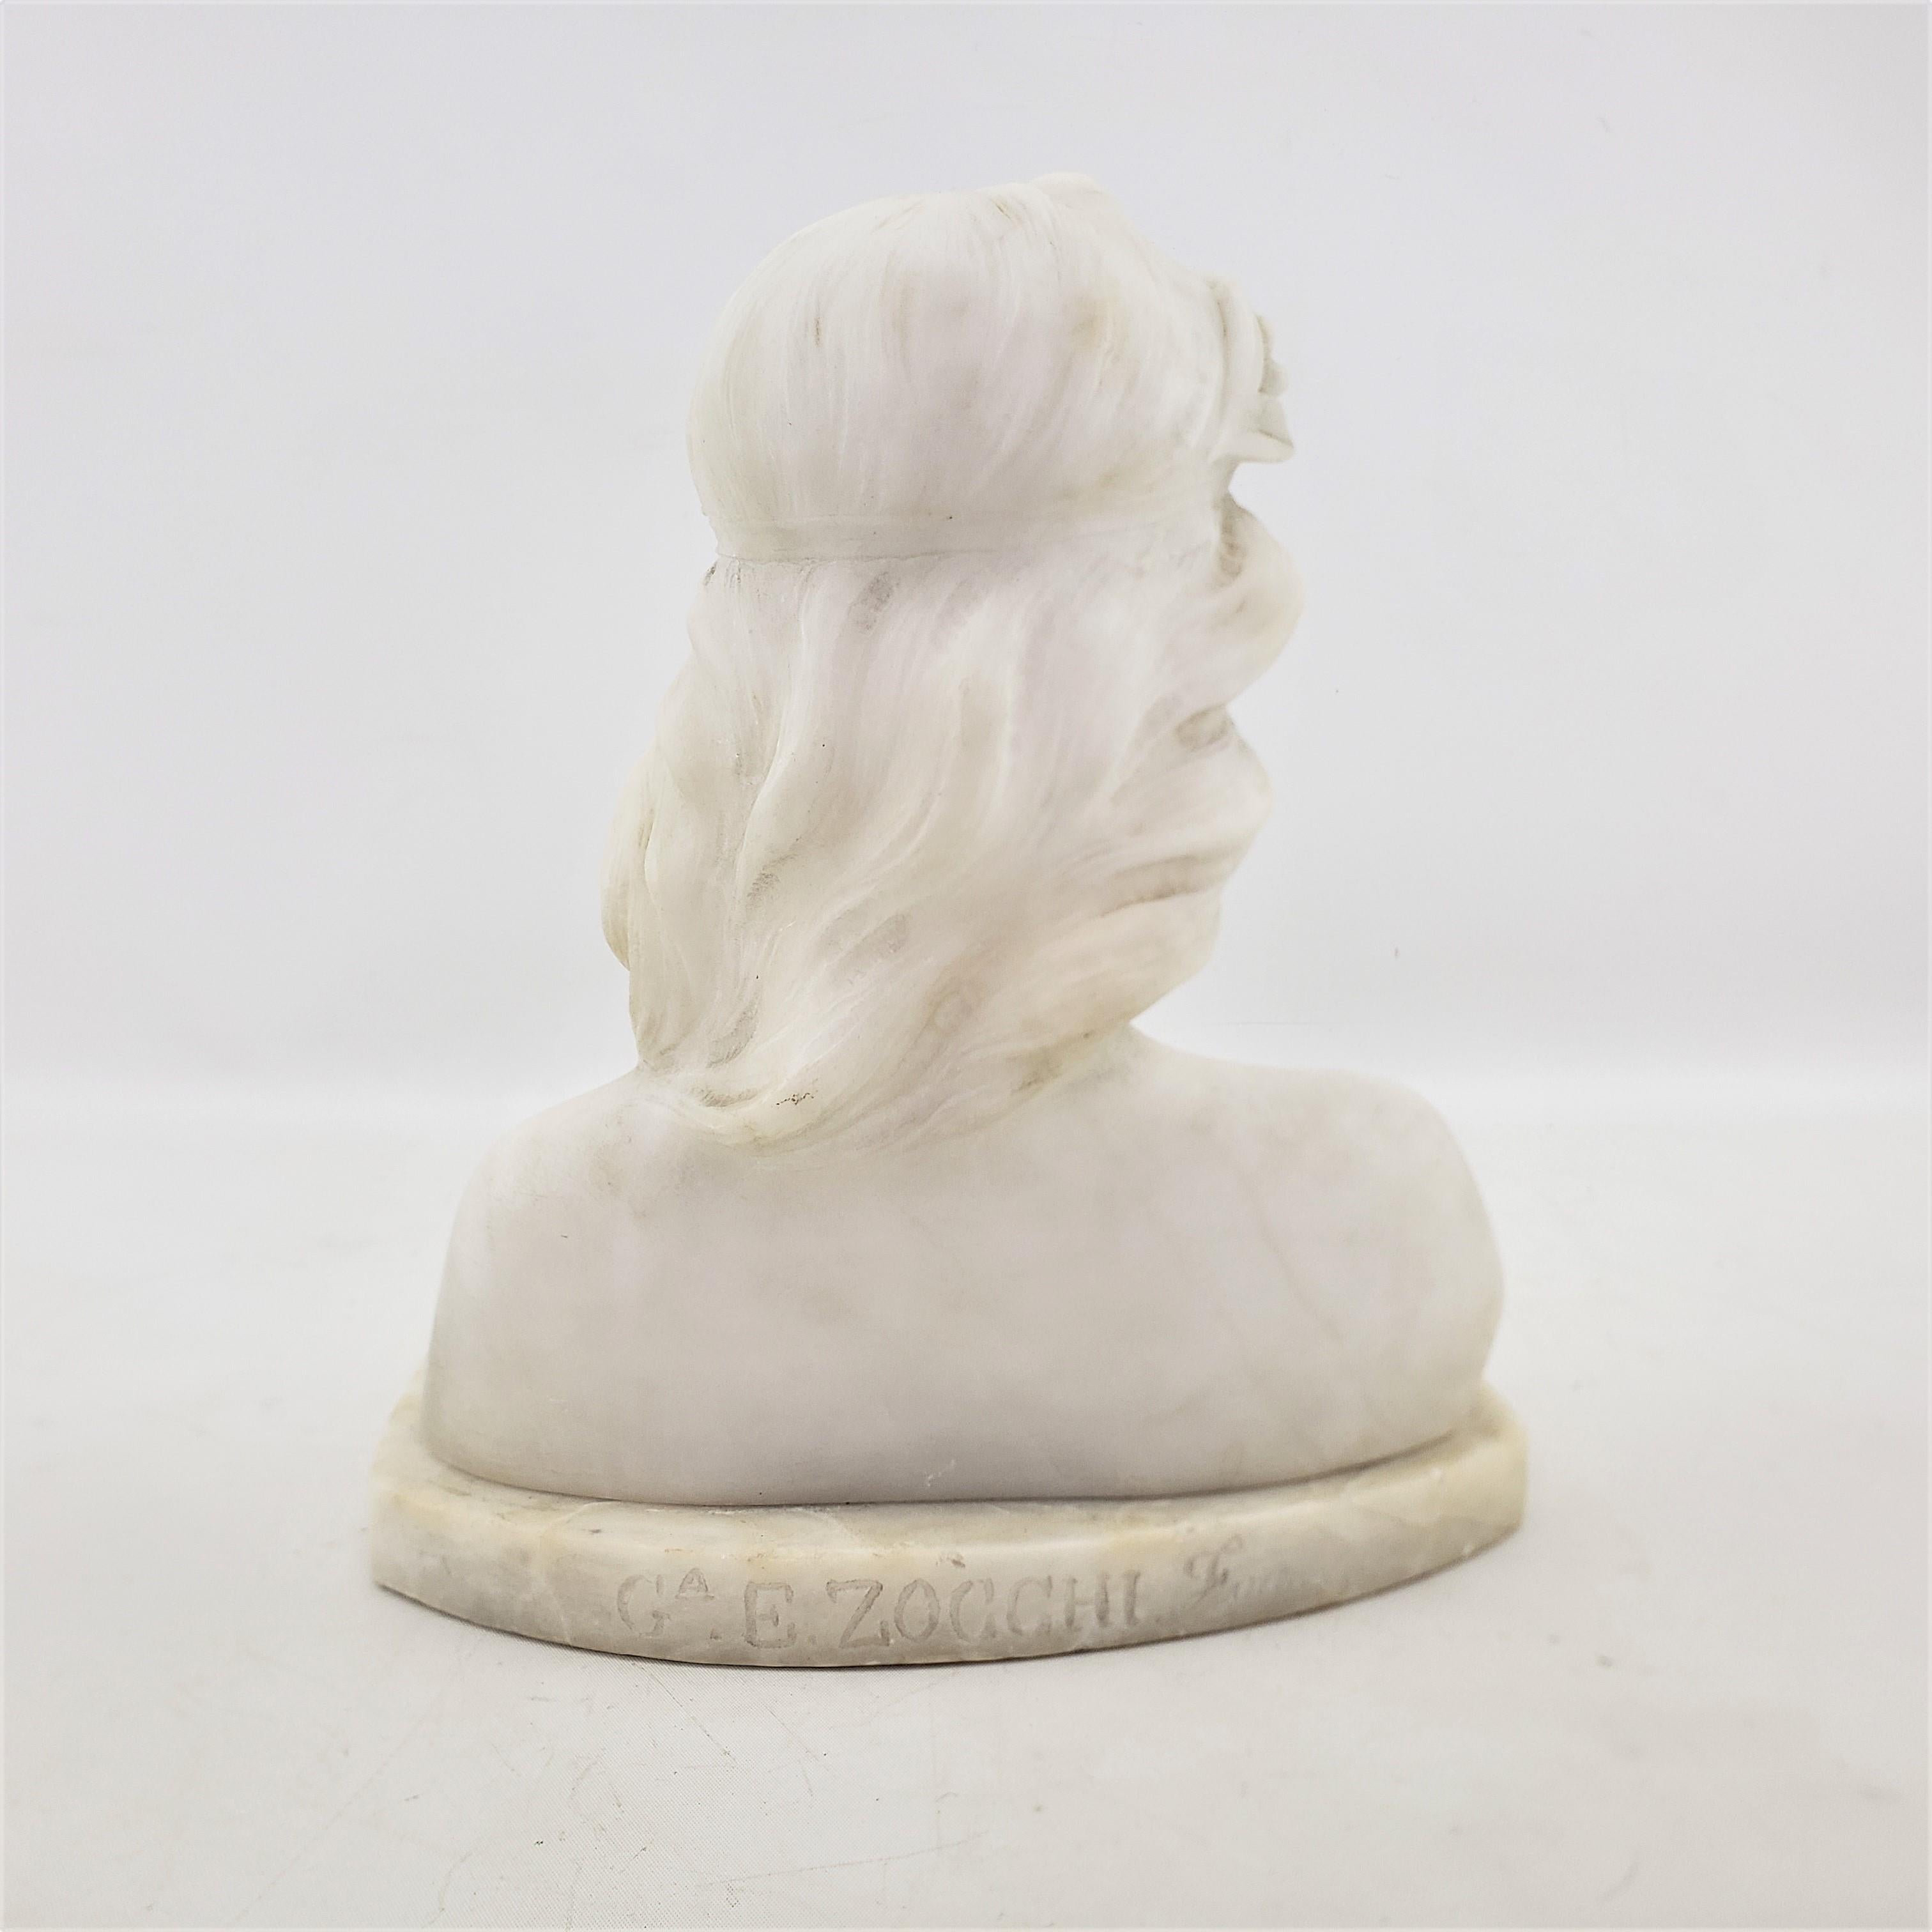 Italian E. Zocchi Signed Antique White Marble Bust or Sculpture of a Young Female 